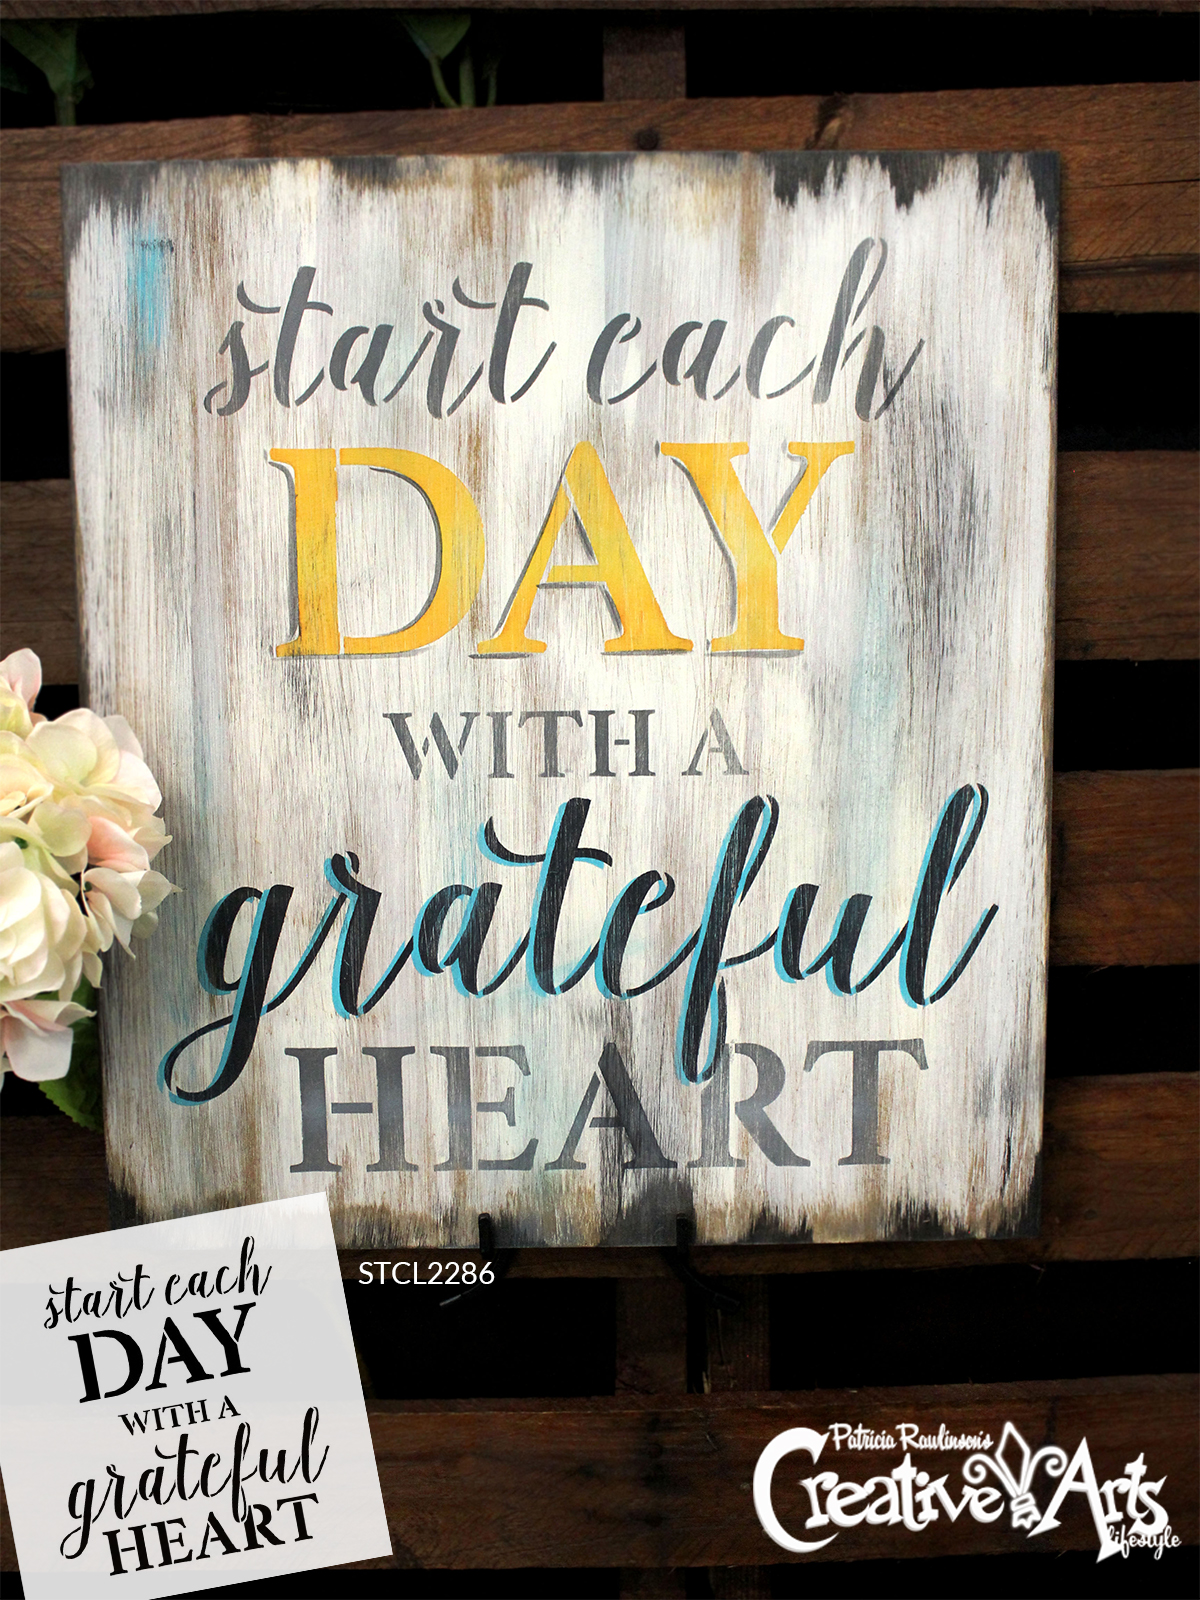 Start Each Day With A Grateful Heart Stencil By Studior12 Reusable Mylar Template Use To Paint Wood Signs Wall Art Pallets Pillows Diy Home Decor Select Size Creative Arts Lifestyle